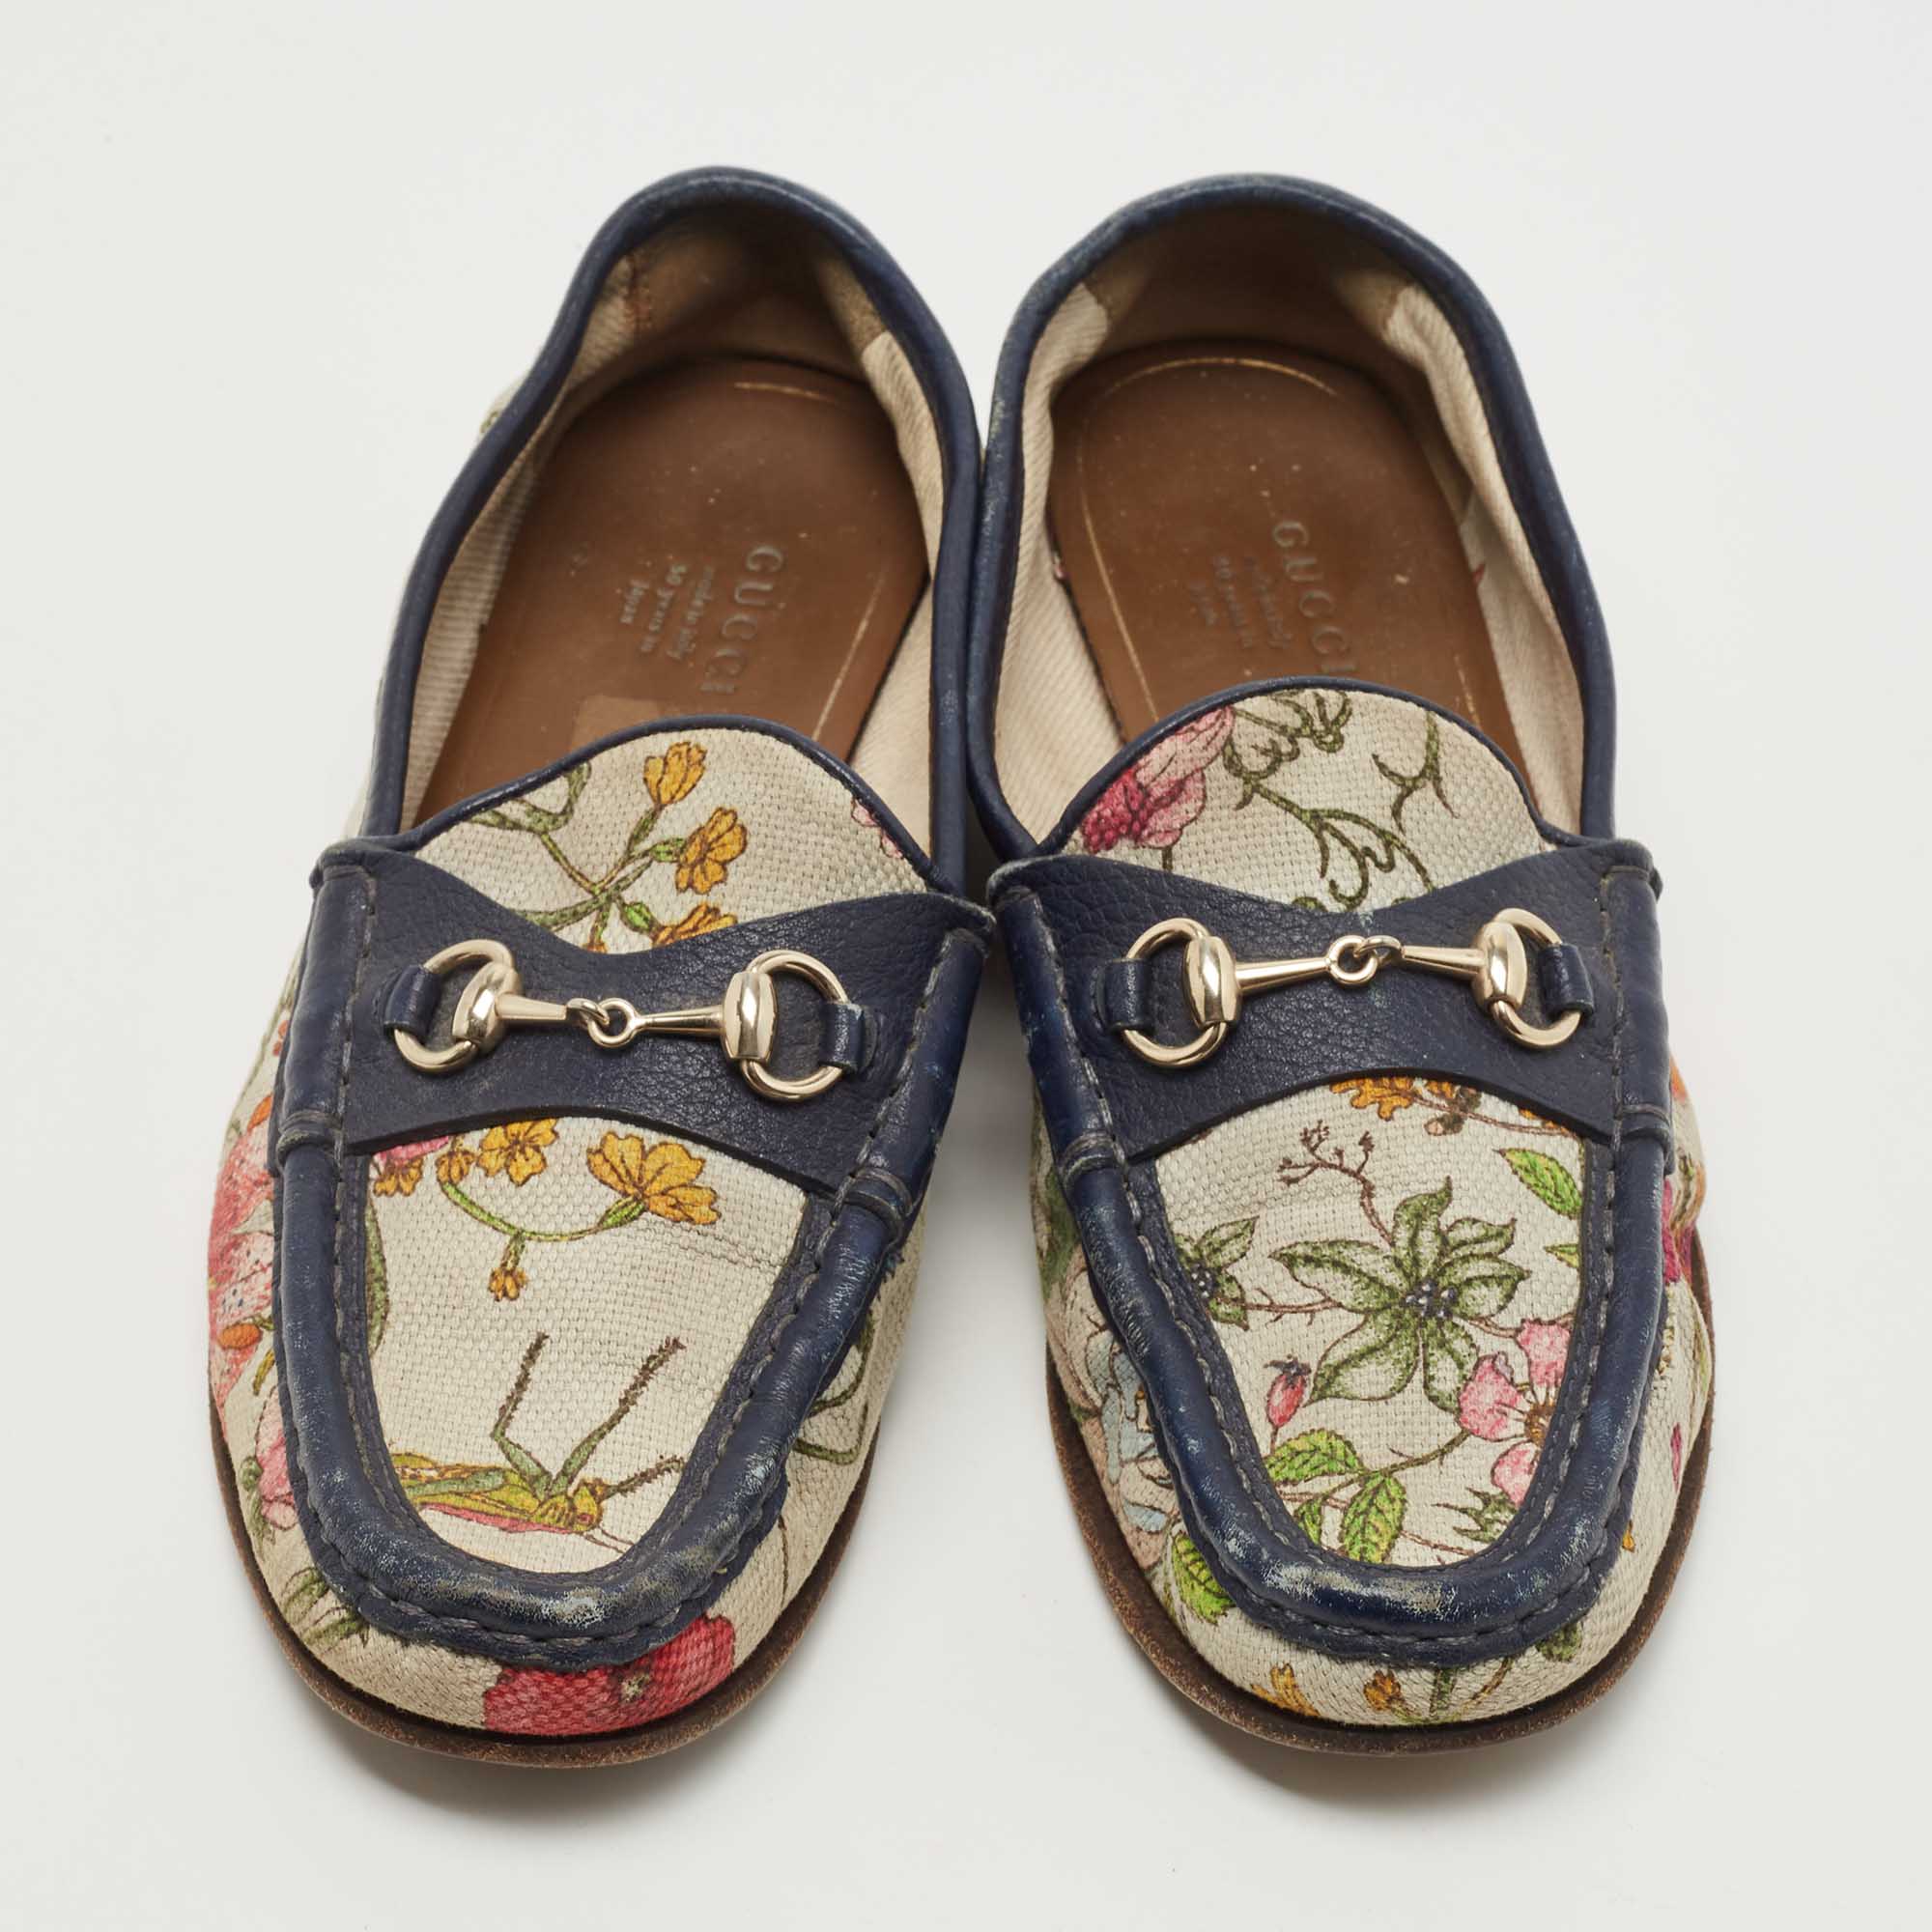 Gucci Navy Blue/White Leather And Floral Print Canvas 1953 Horsebit Loafers Size 36